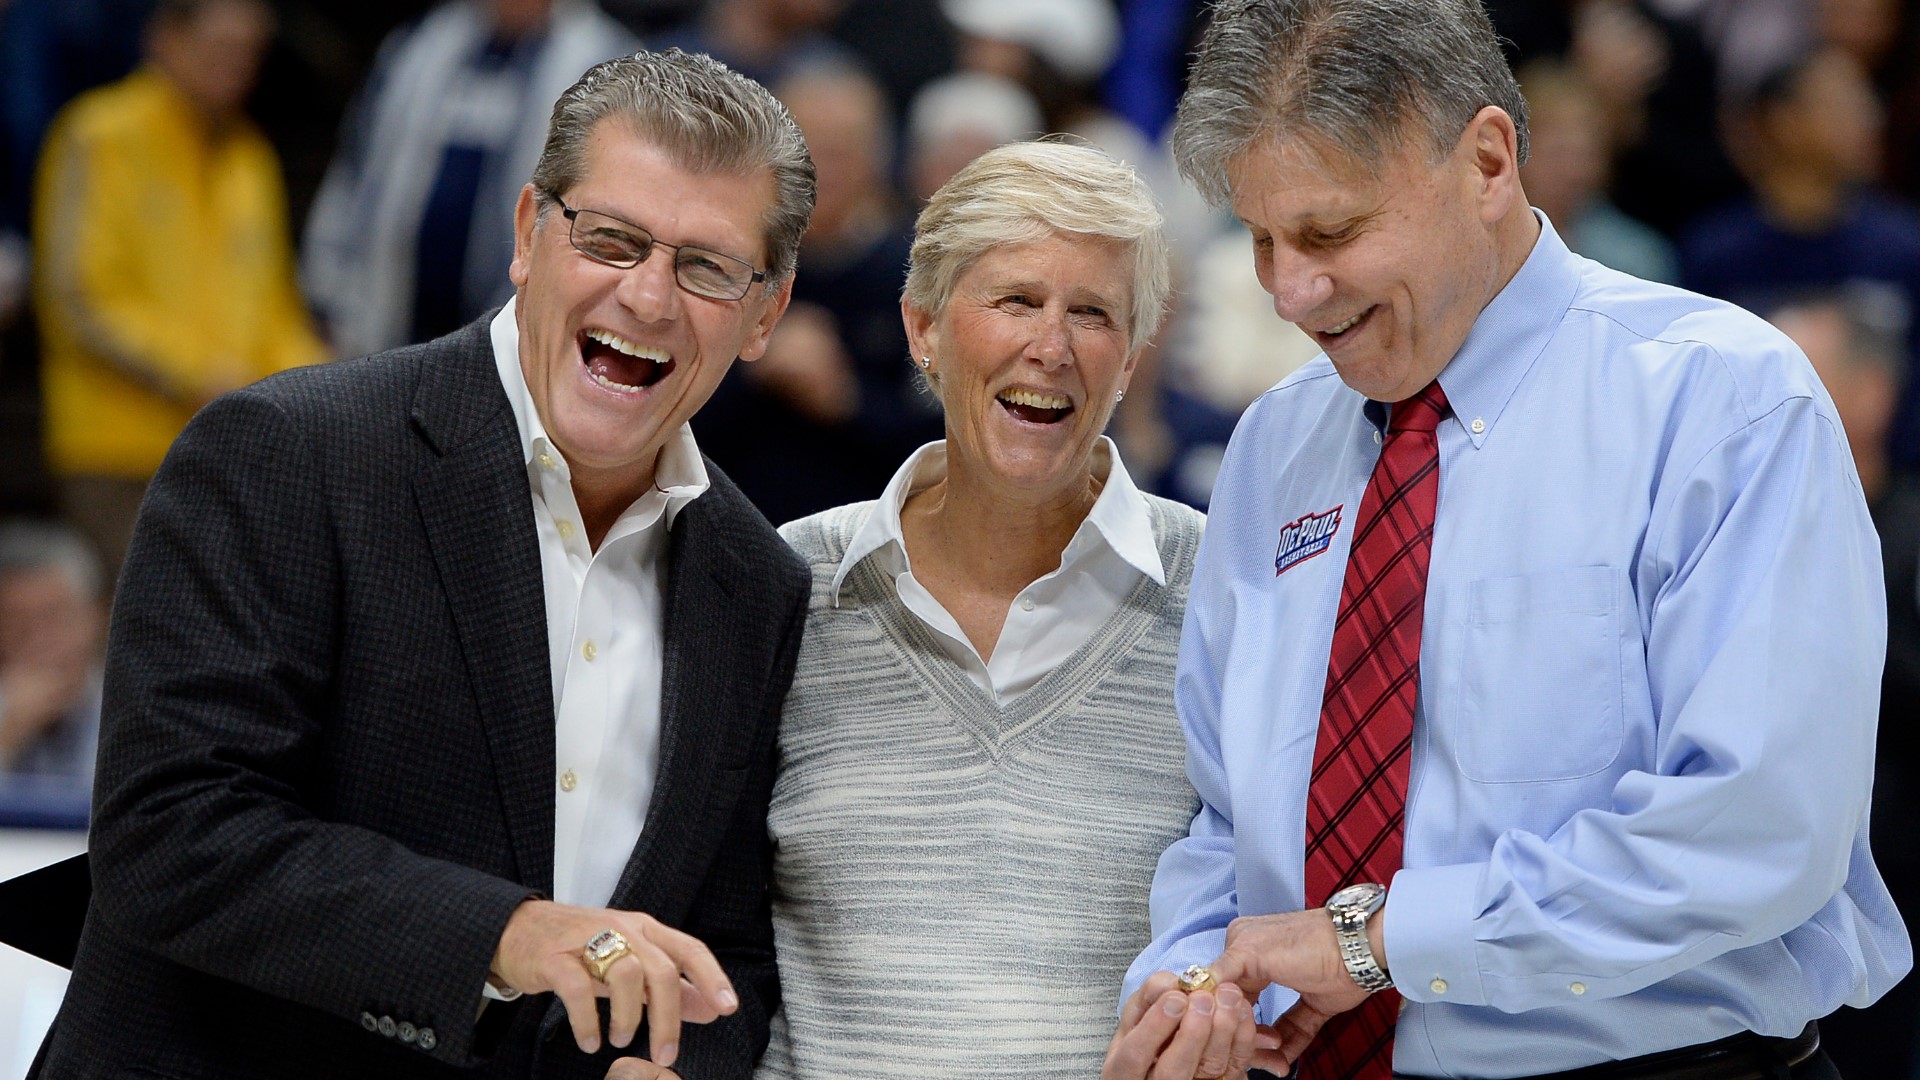 The USA Women's Basketball Team Director will be stepping down after the Tokyo Games.